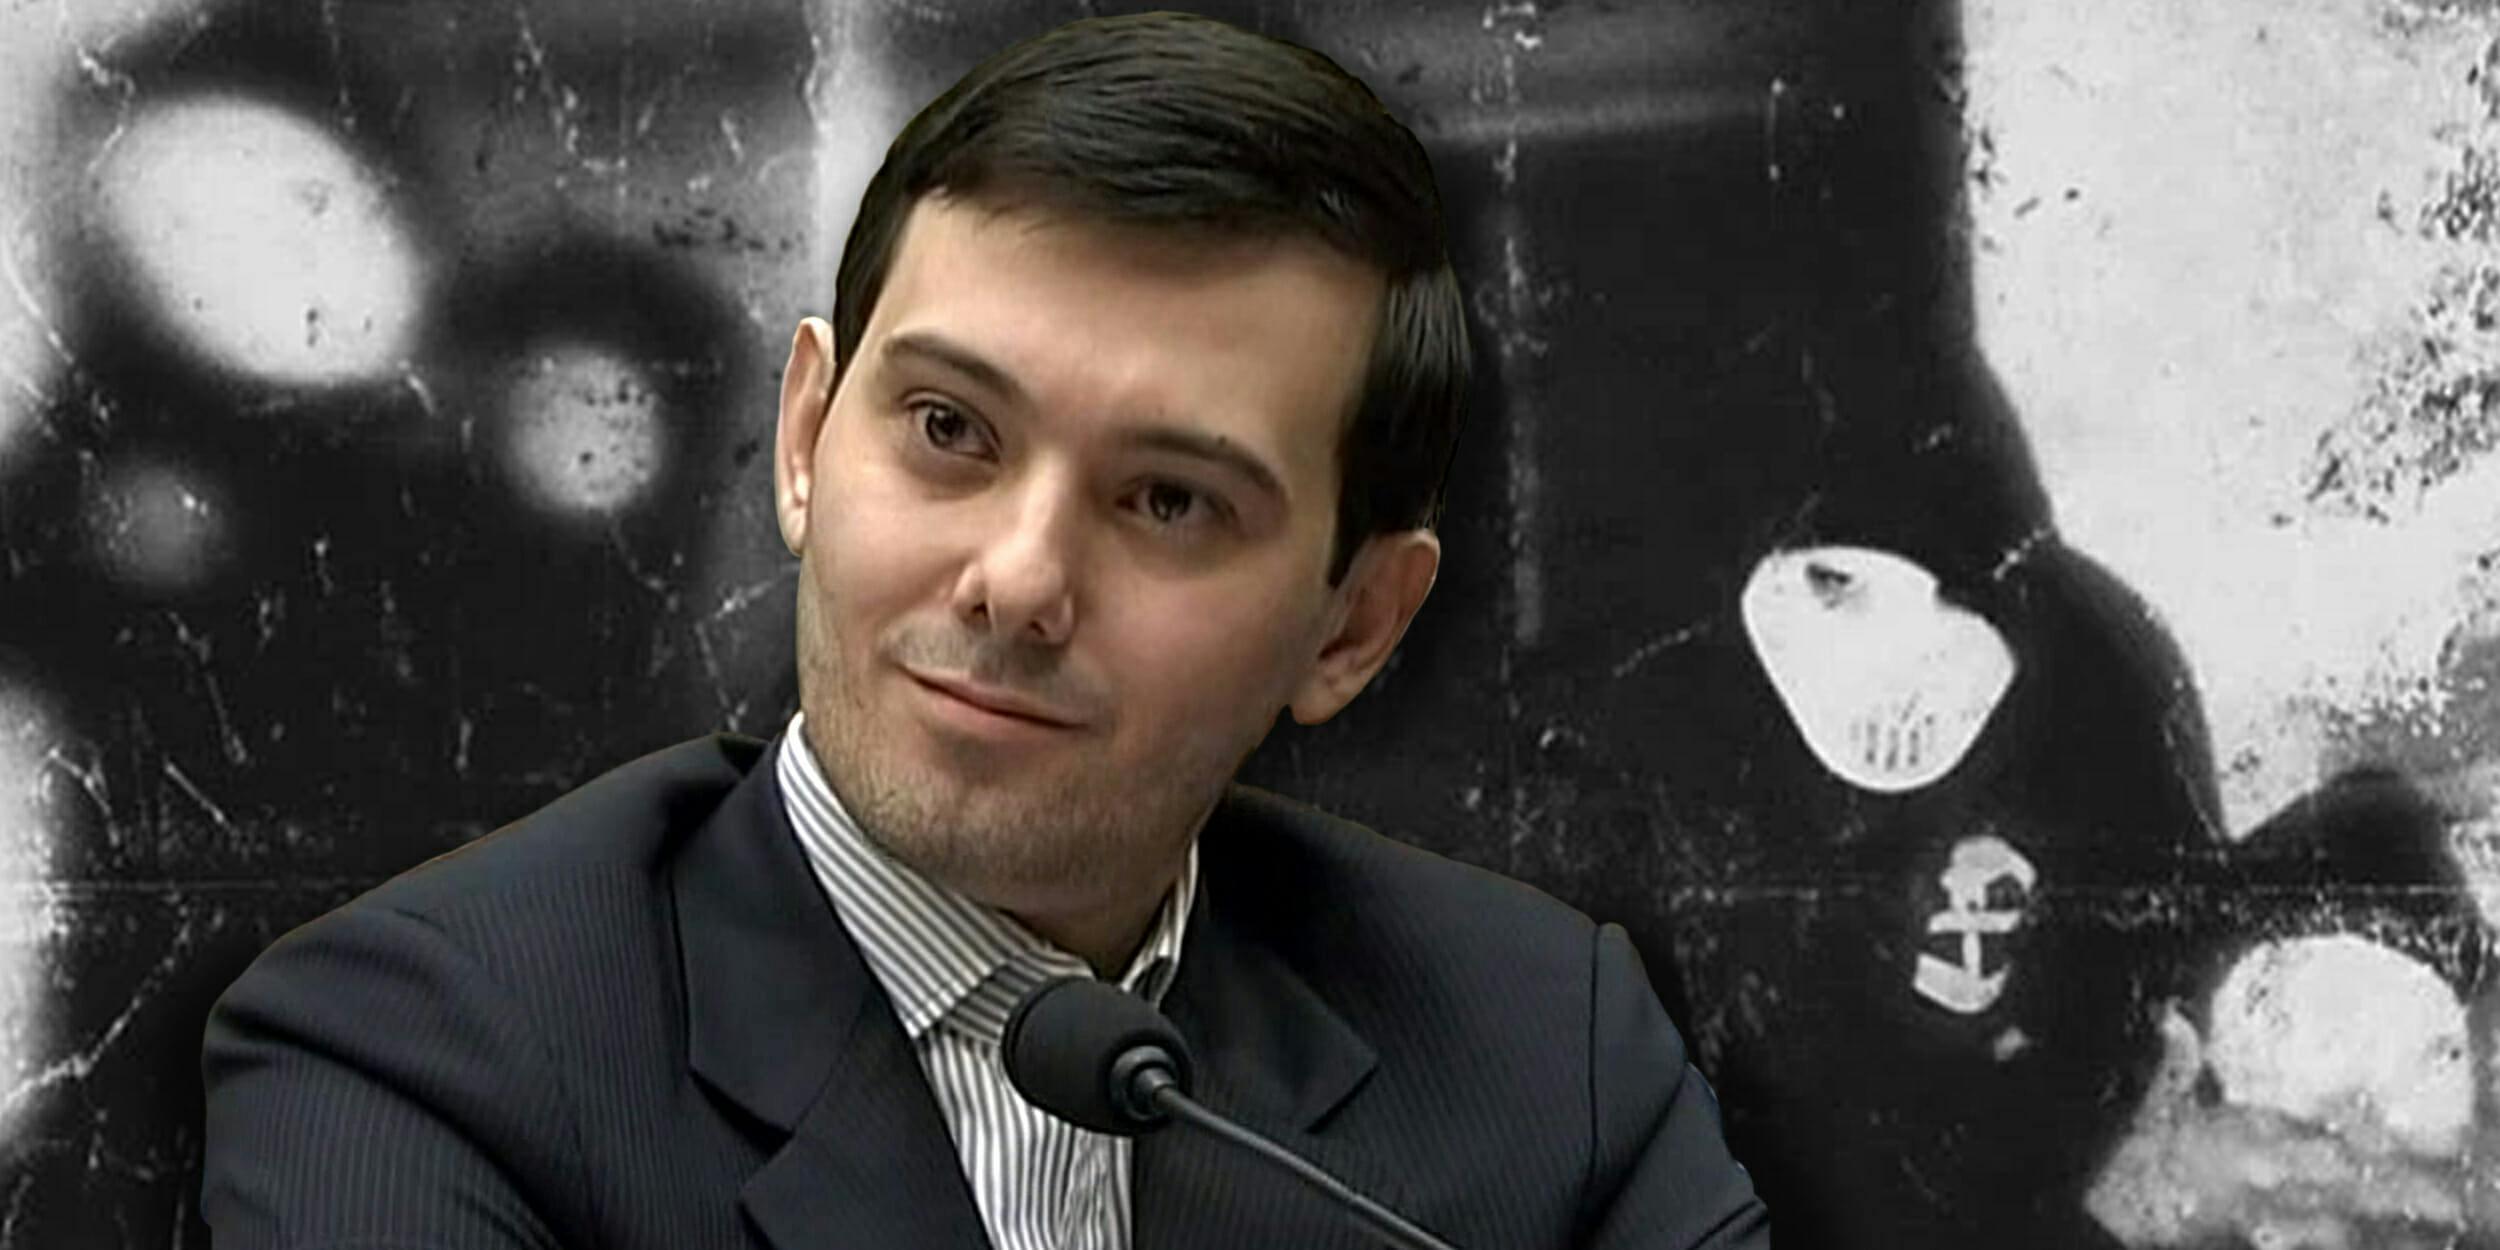 Martin Shkreli in front of "Once Upon A Time In Shaolin" cover